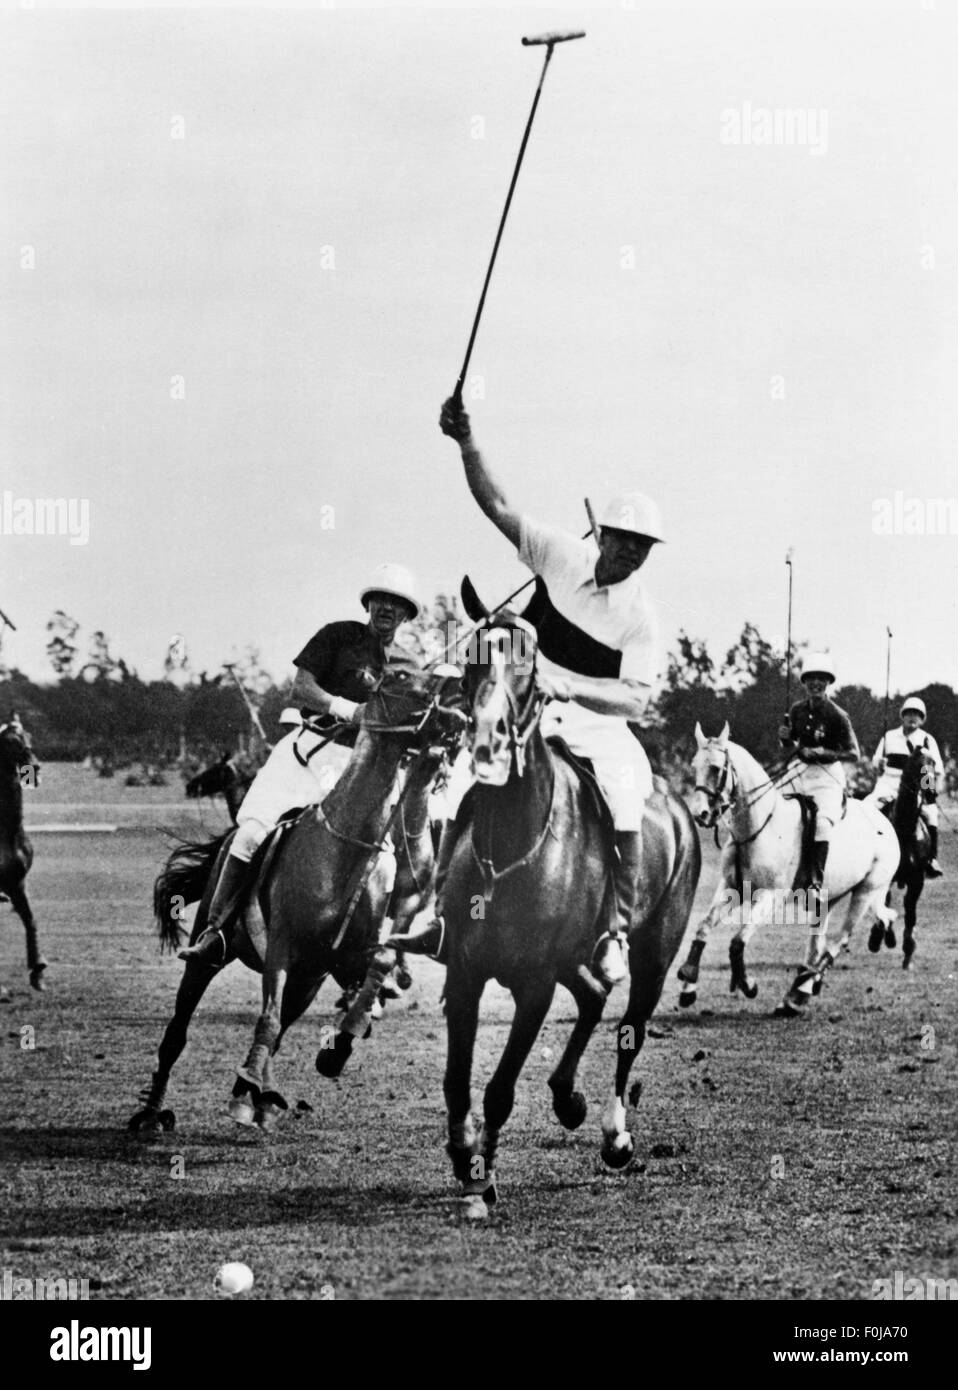 sports,Olympic Games,Berlin 1936,polo,preliminary game Hungary versus Germany 8: 8 after extra time,German player attacking,Berlin,4.8.1936,Germany,match,matches,player,players,playing,play,rider,riders,horse,horses,horse-riding,riding,equine sports,equestrian sport,equitation,racket,racquet,rackets,racquets,Olympia,Olympic Games,Olympics,Olympiad,championship,championships,contest,contests,tournament,tourney,tournaments,tourneys,competition,competitions,1930s,30s,20th century,preliminary game,preliminary games,in ,Additional-Rights-Clearences-Not Available Stock Photo